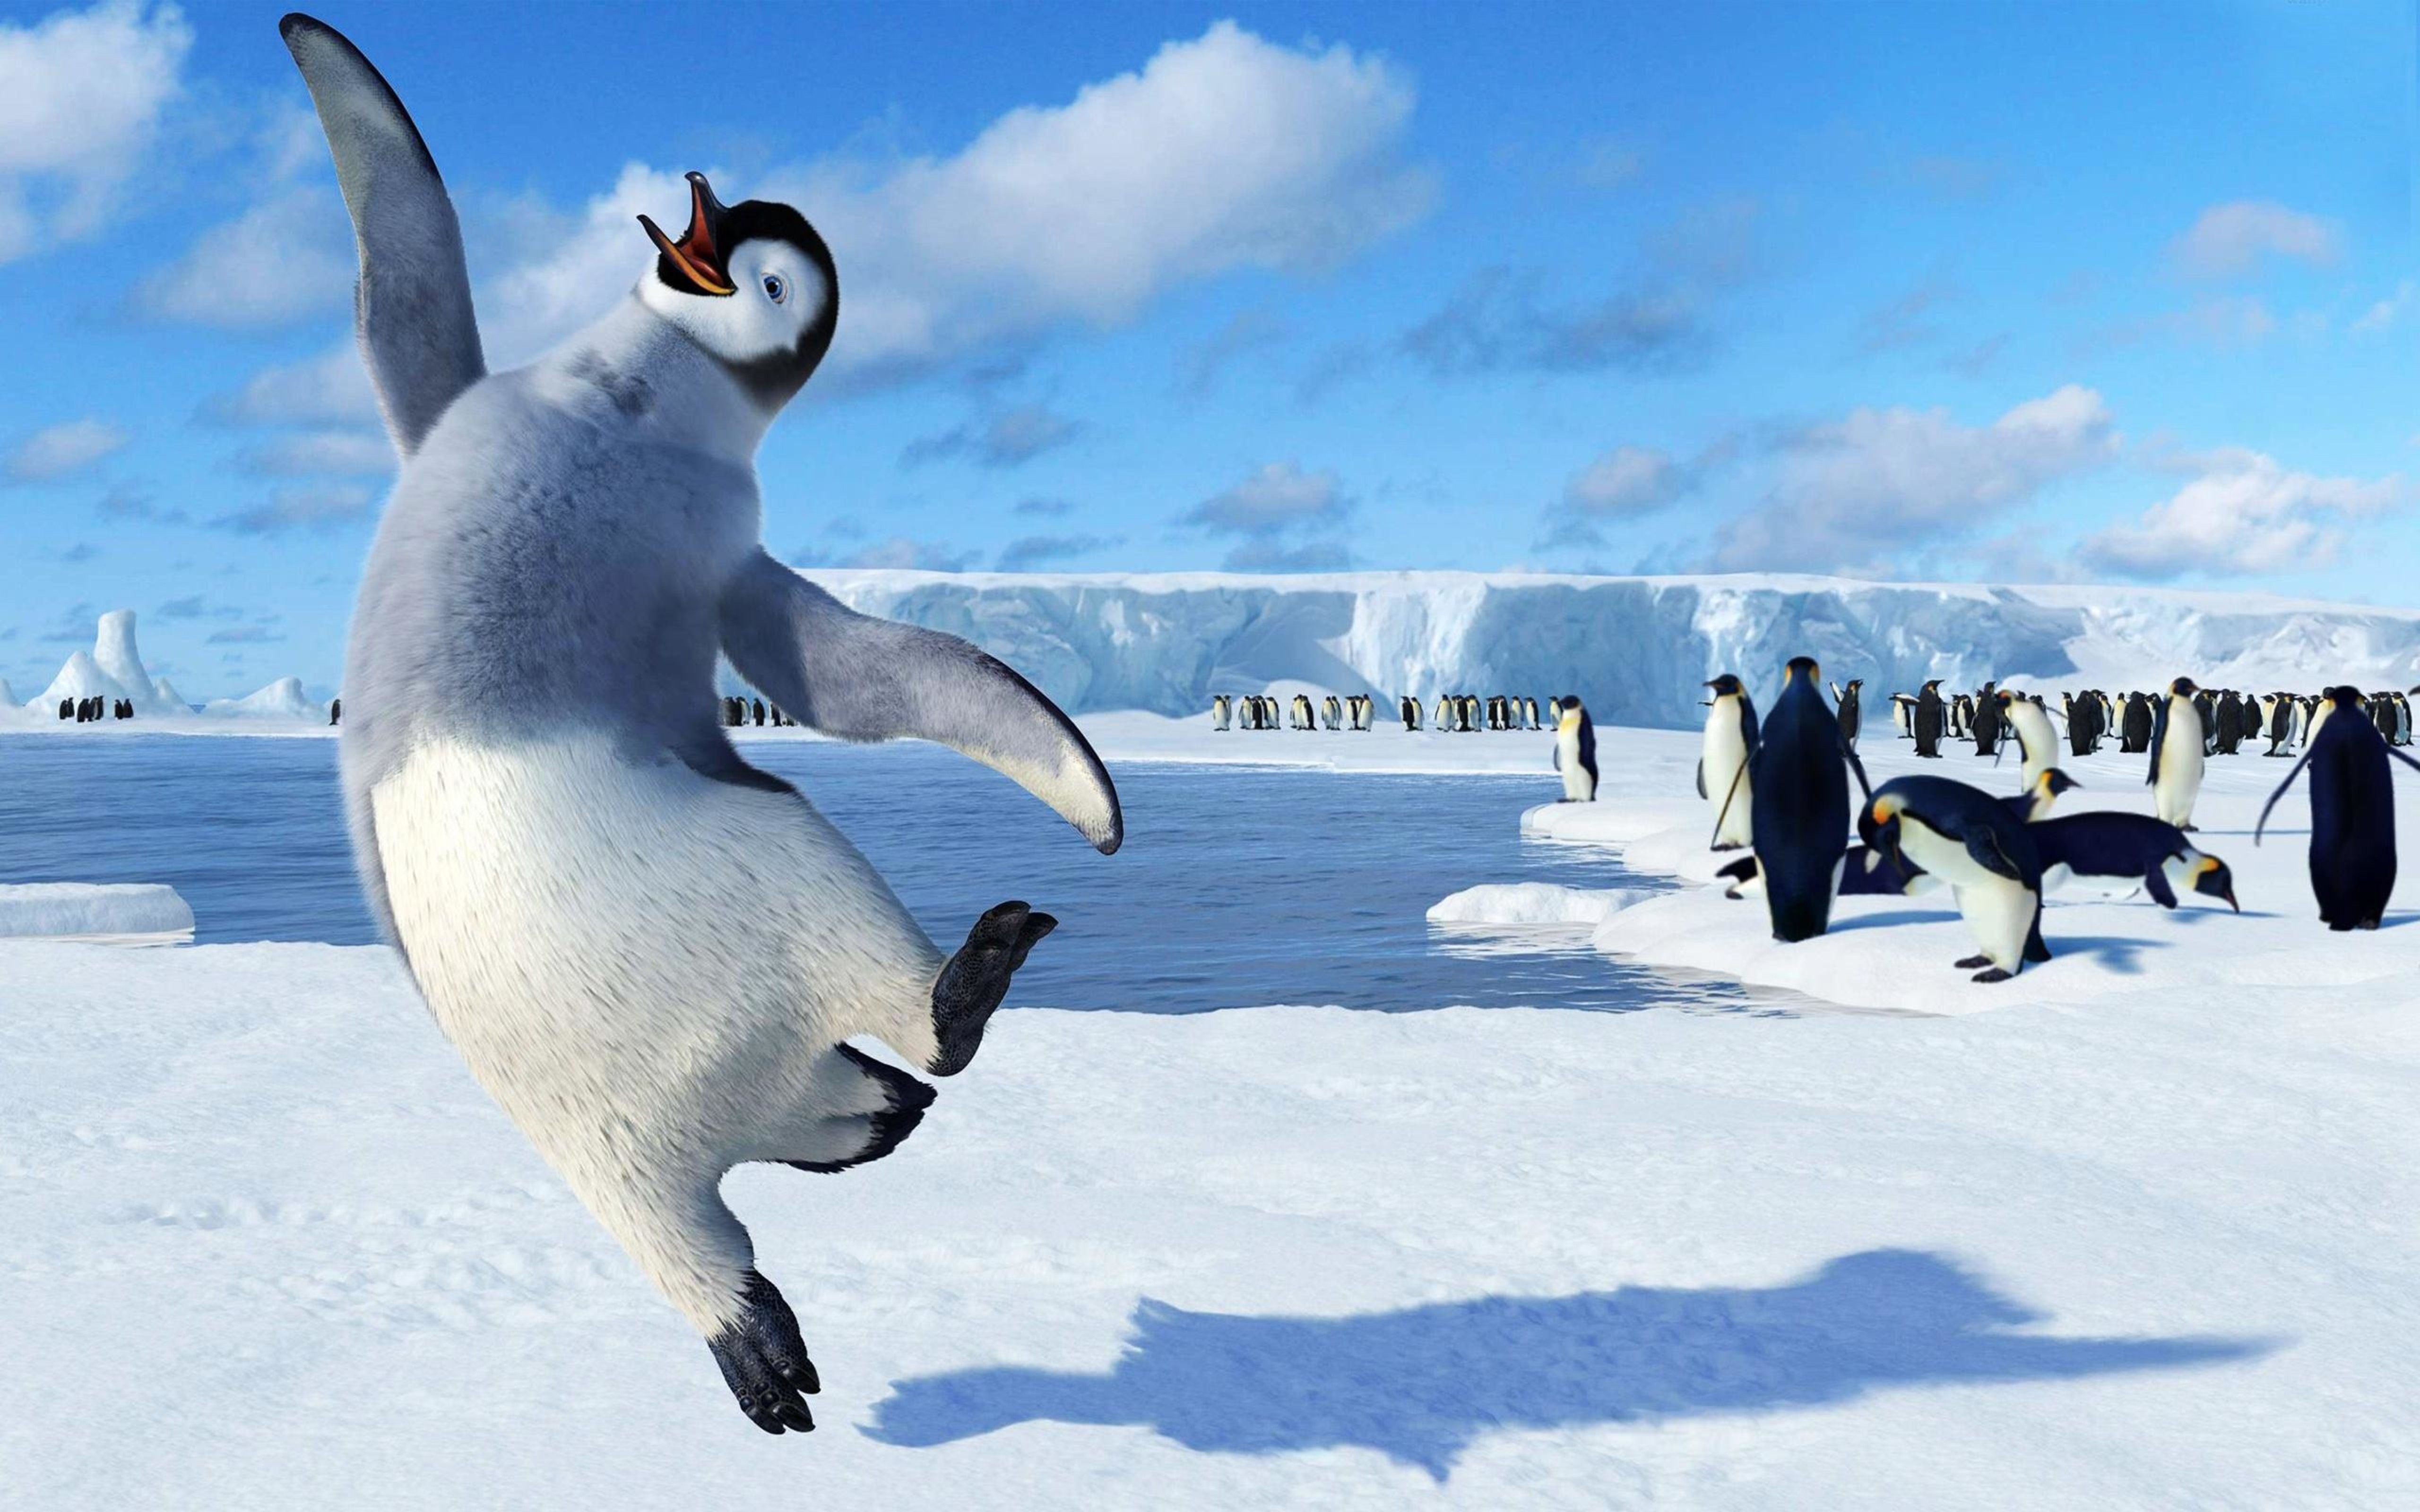 Happy Feet Funny Animation Movie With Sweet Penguins